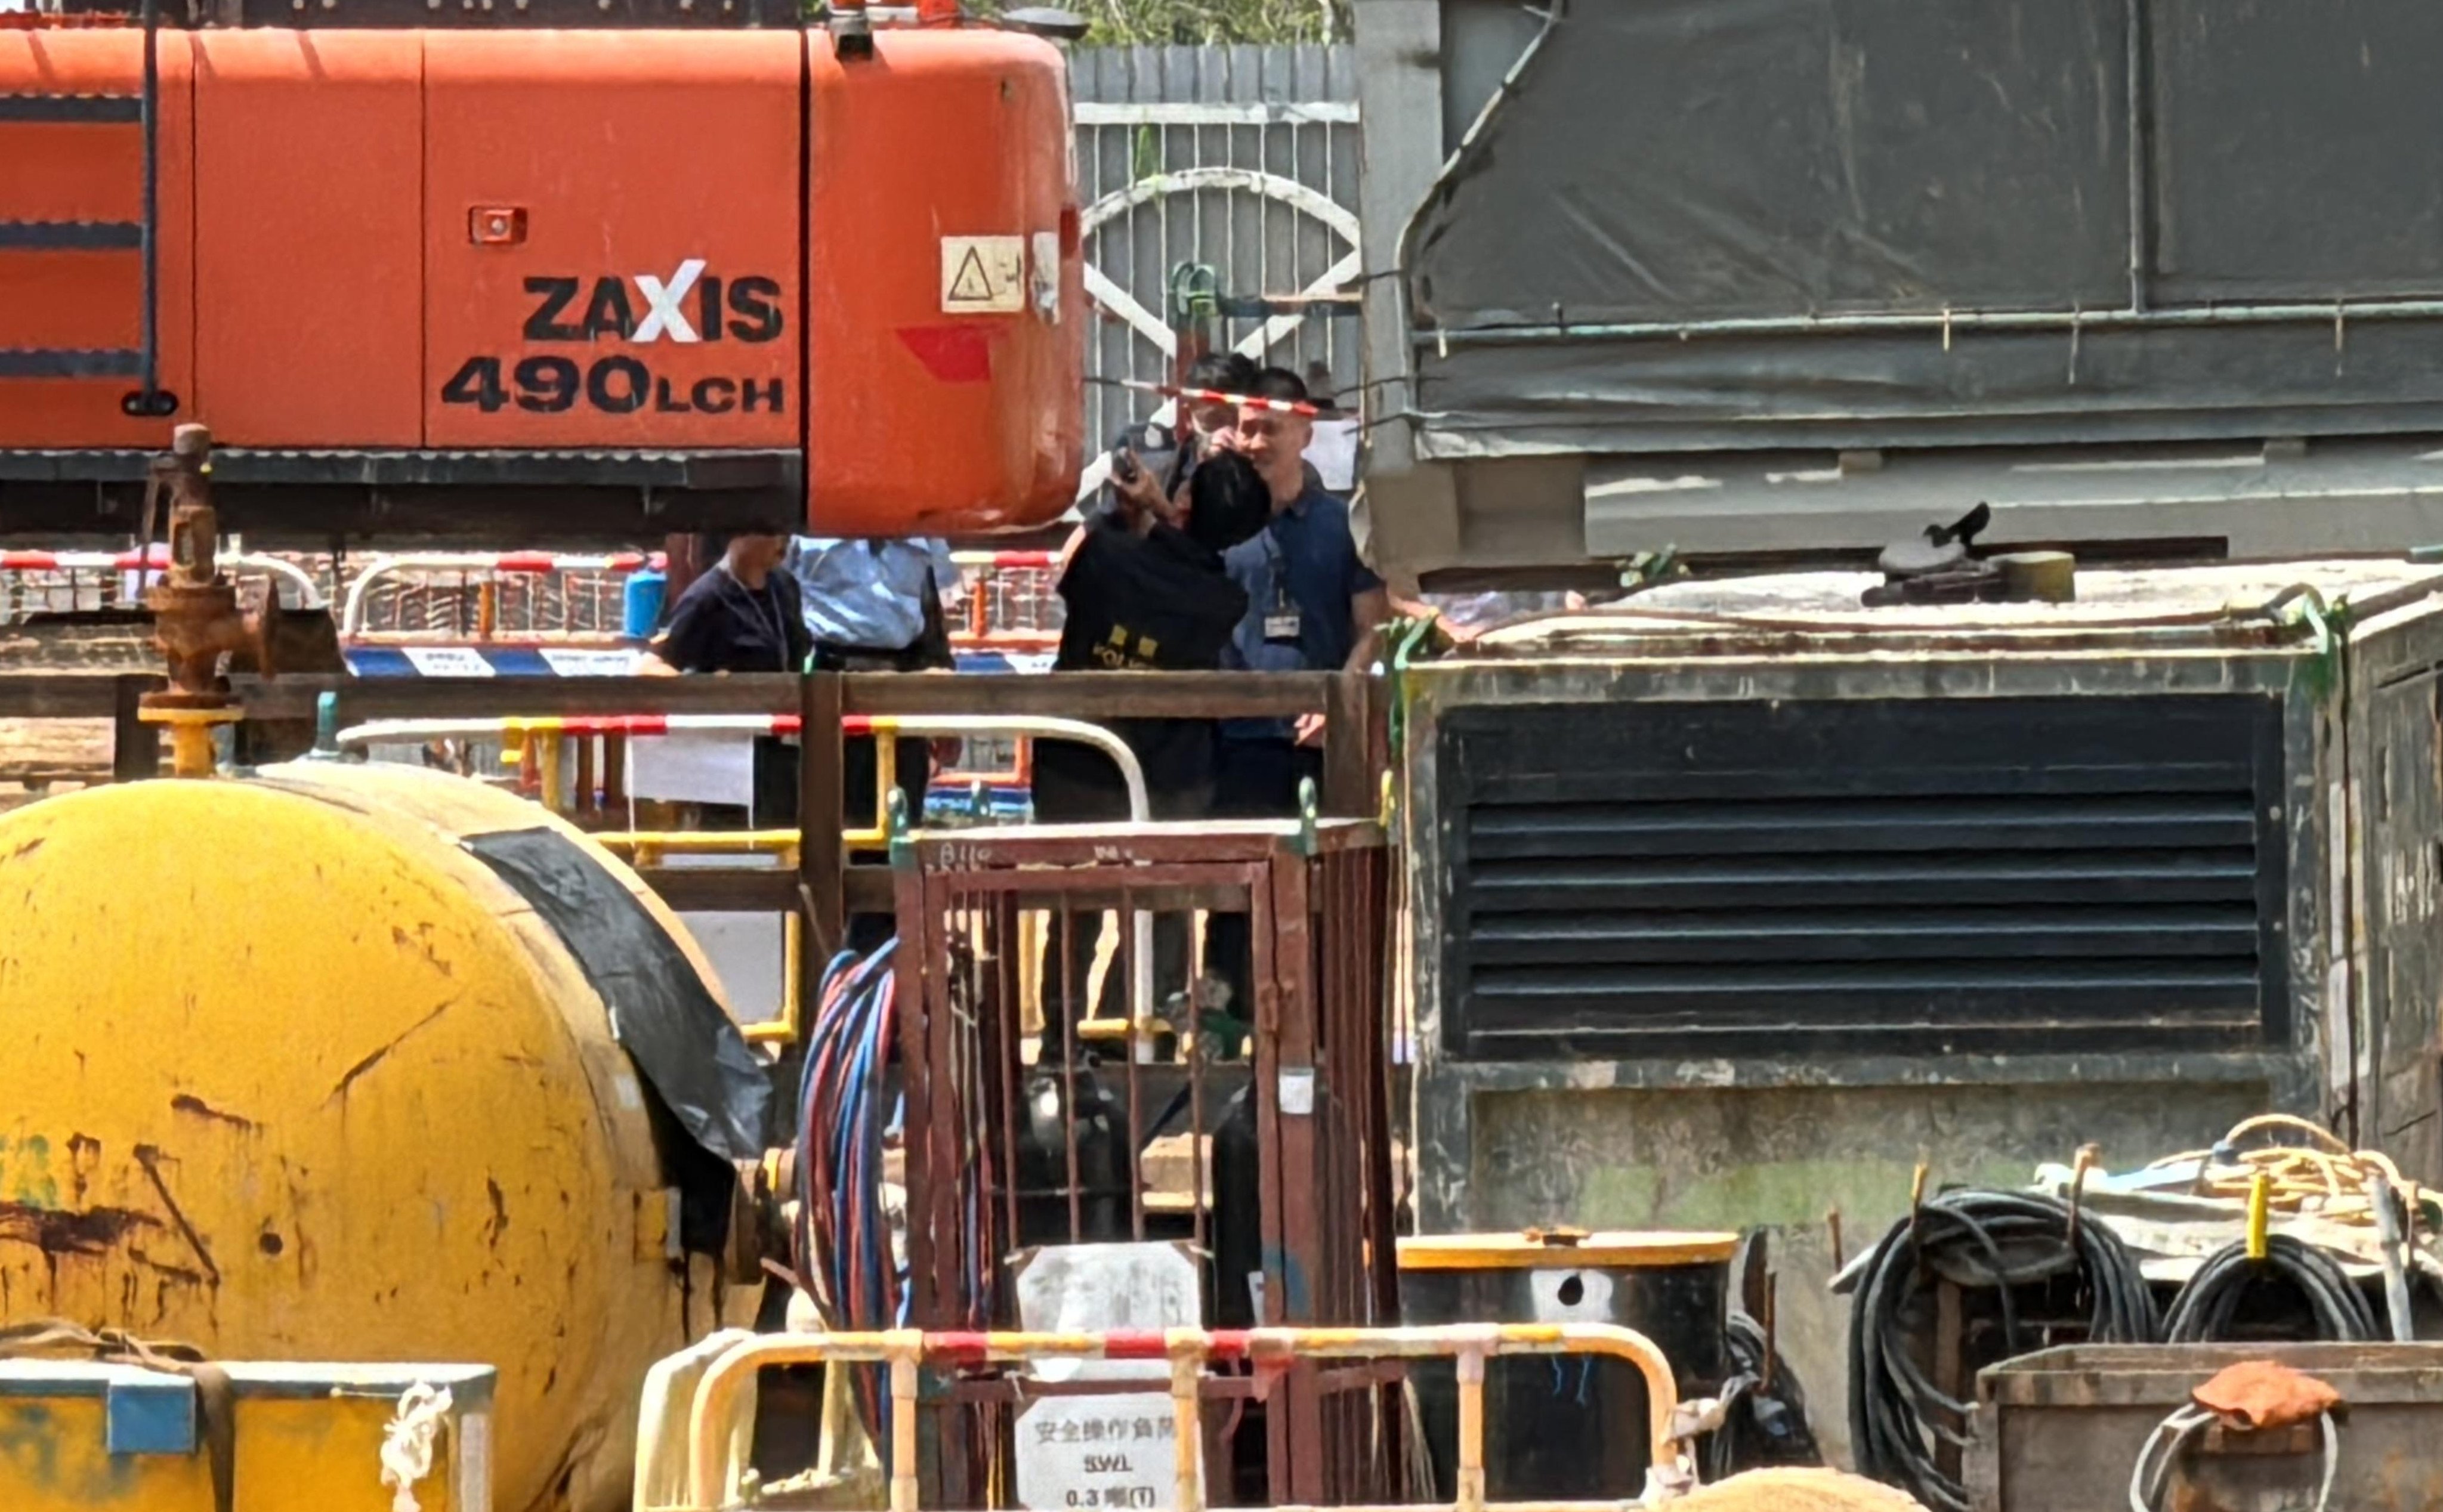 The Lai Kong Street construction site in Kwai Chung, where a dump truck driver was killed on Thursday after his head was crushed between his vehicle and an excavator. Photo: Handout